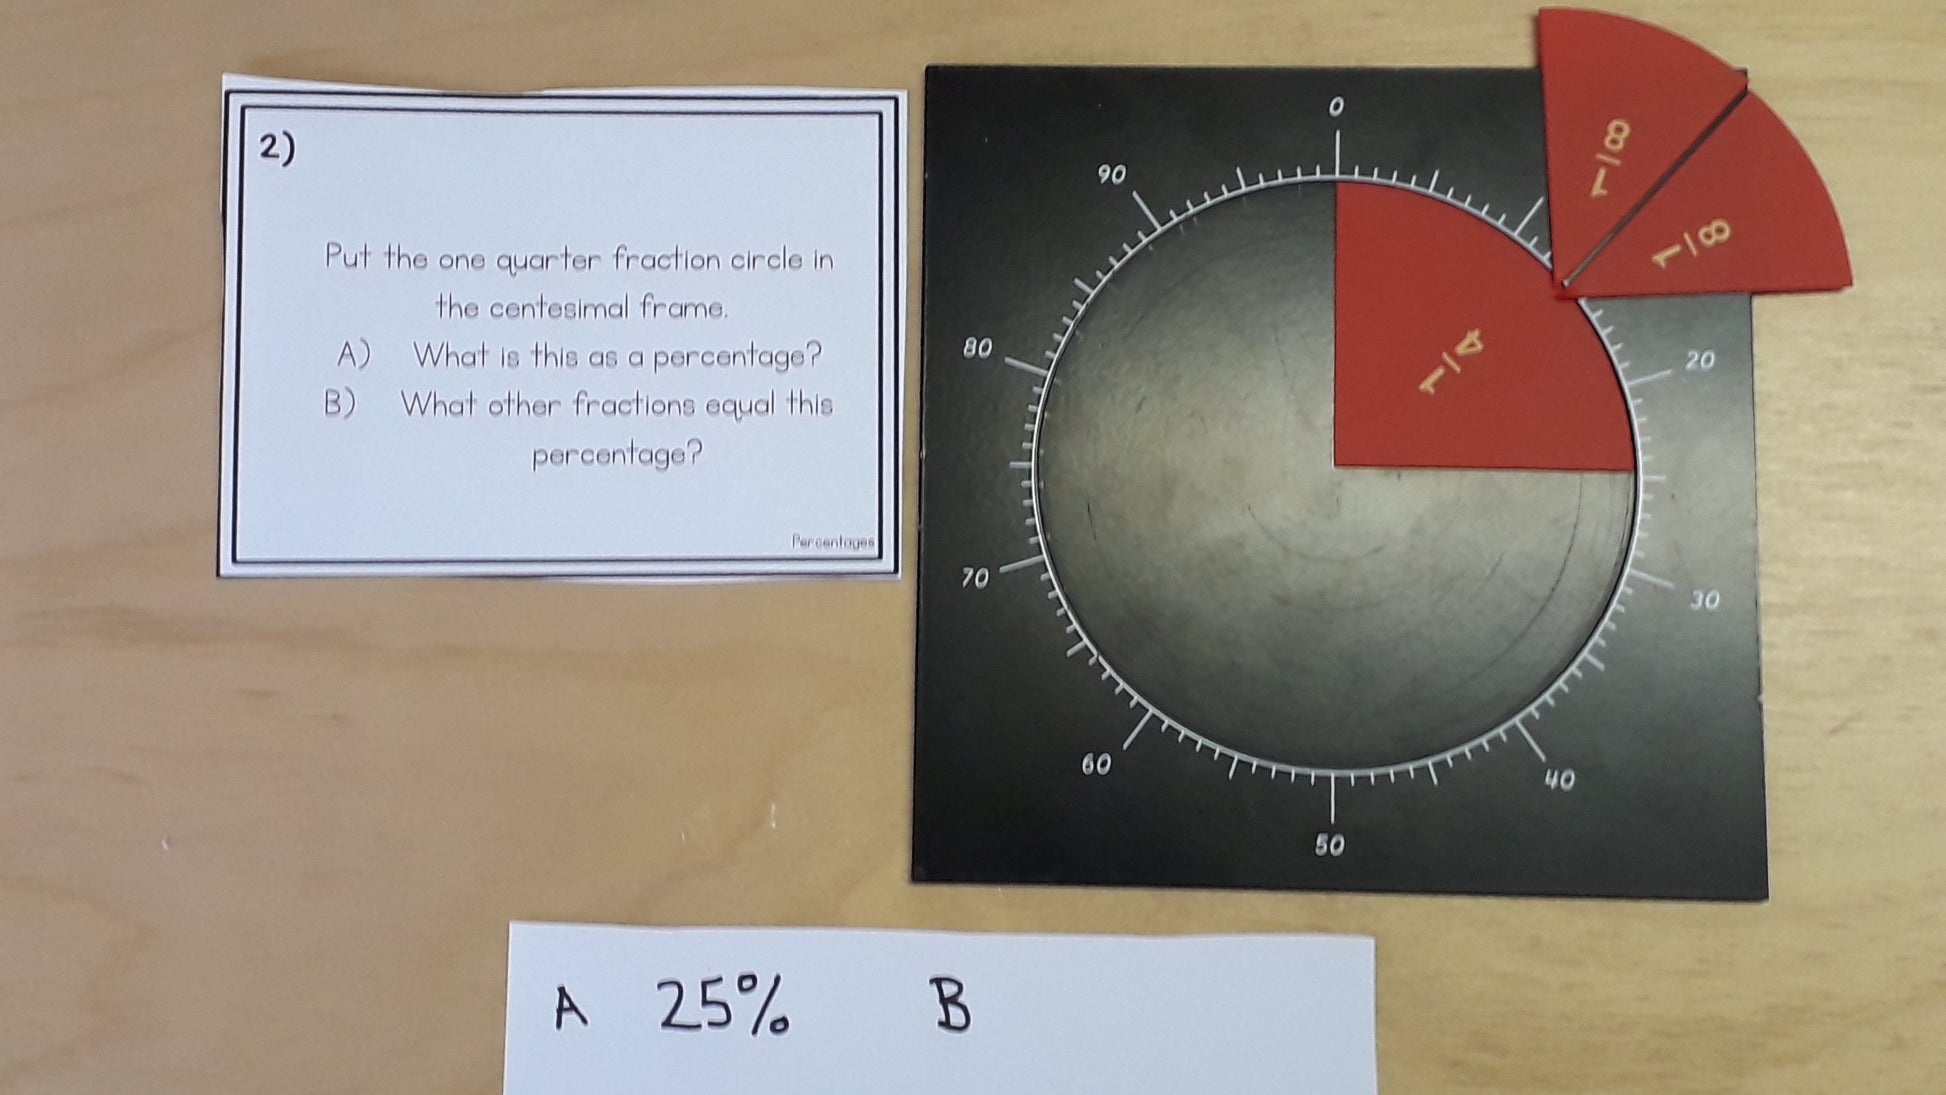 Converting Fractions to Percentages Task Cards - montessorikiwi